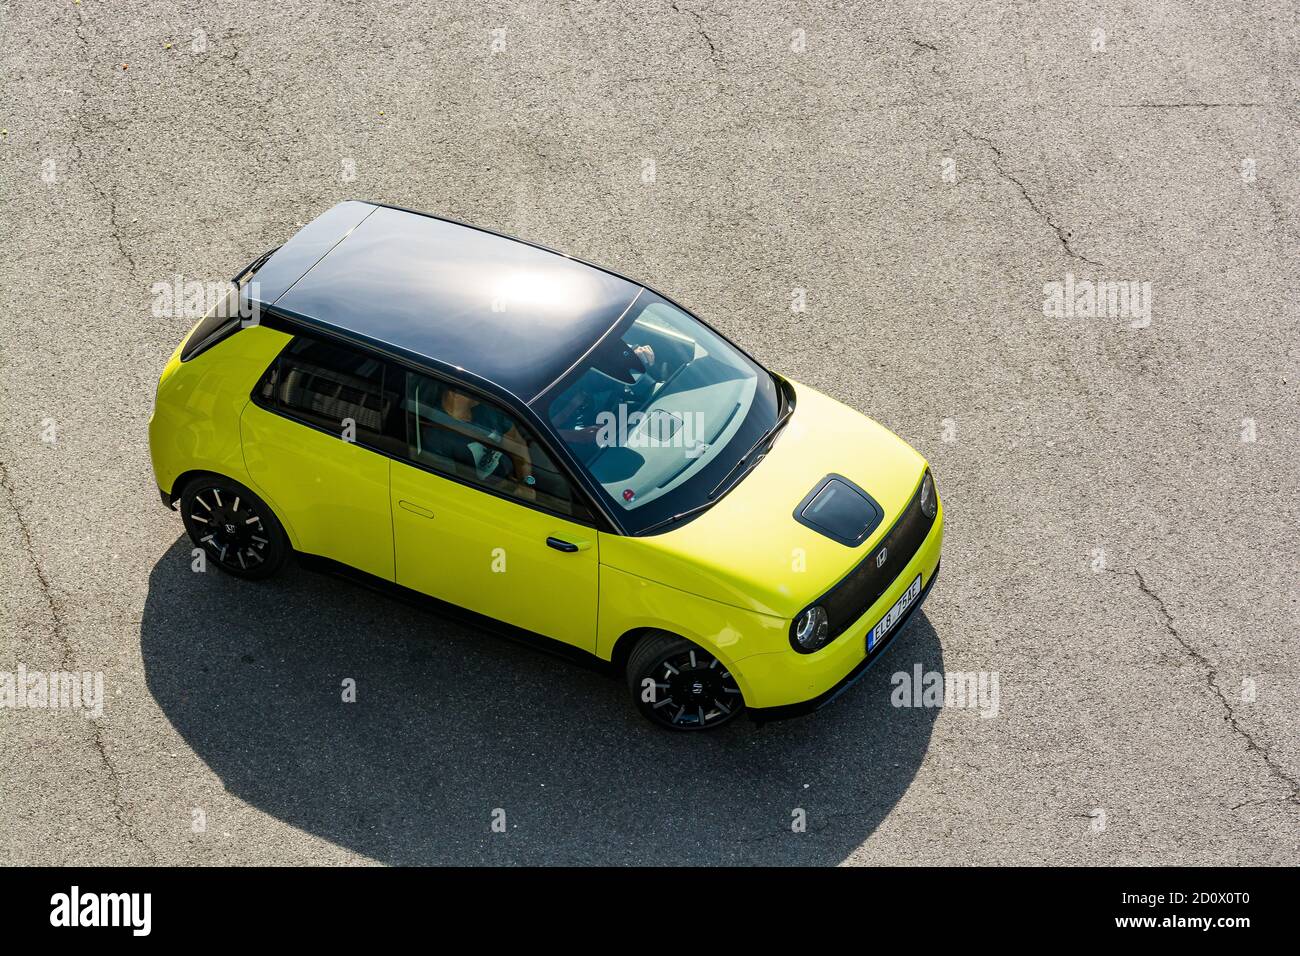 Prague, Czech republic - October 02, 2020. Yellow green electric Honda E - driving on the tar road - view on the black roof of birds perspective Stock Photo